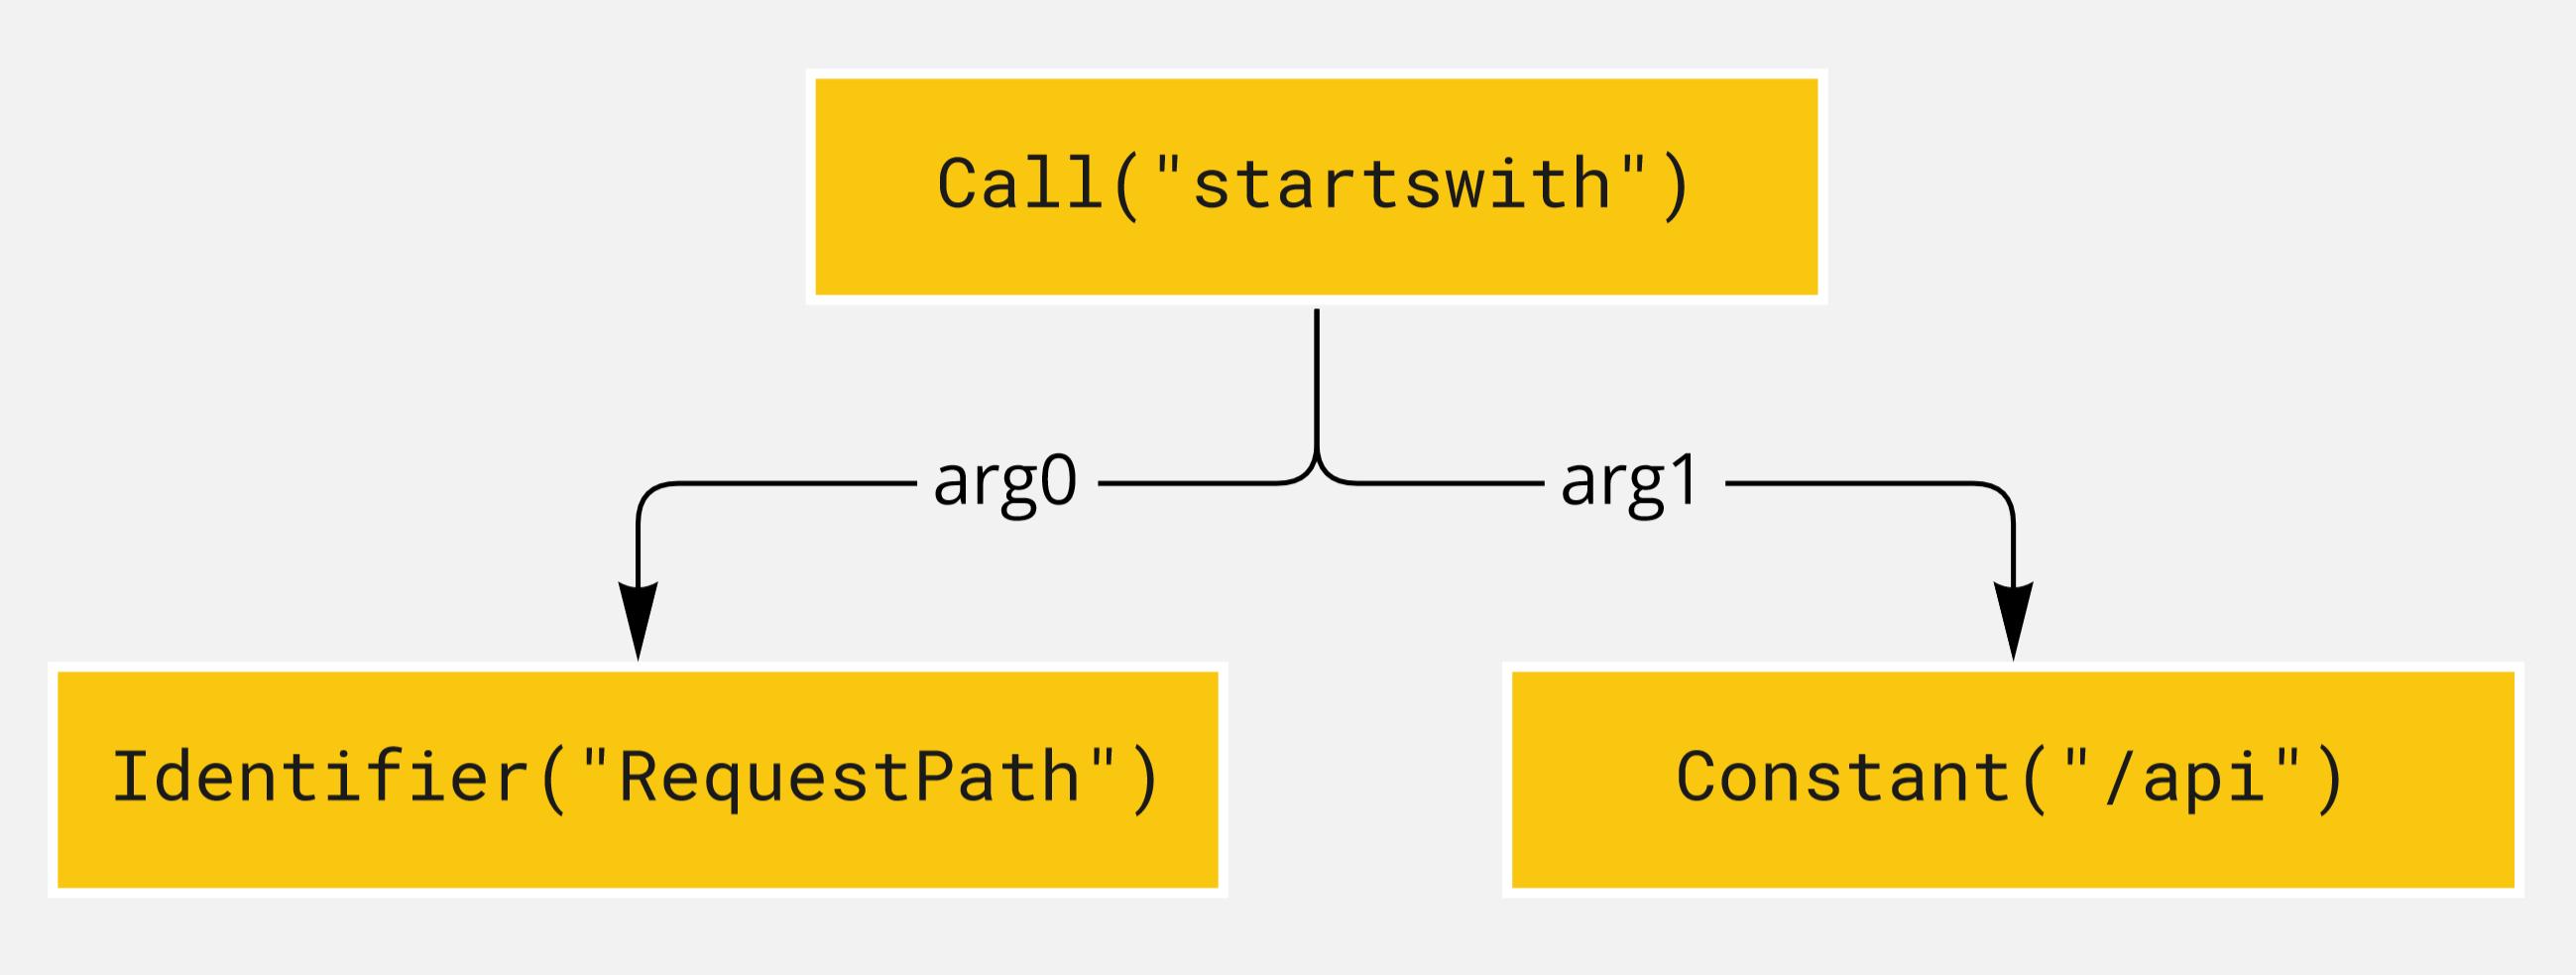 An expression tree, with Call("startswith") root node, Identifier("RequestPath") as the left/first argument, and Constant("/api") as the right/second argument.